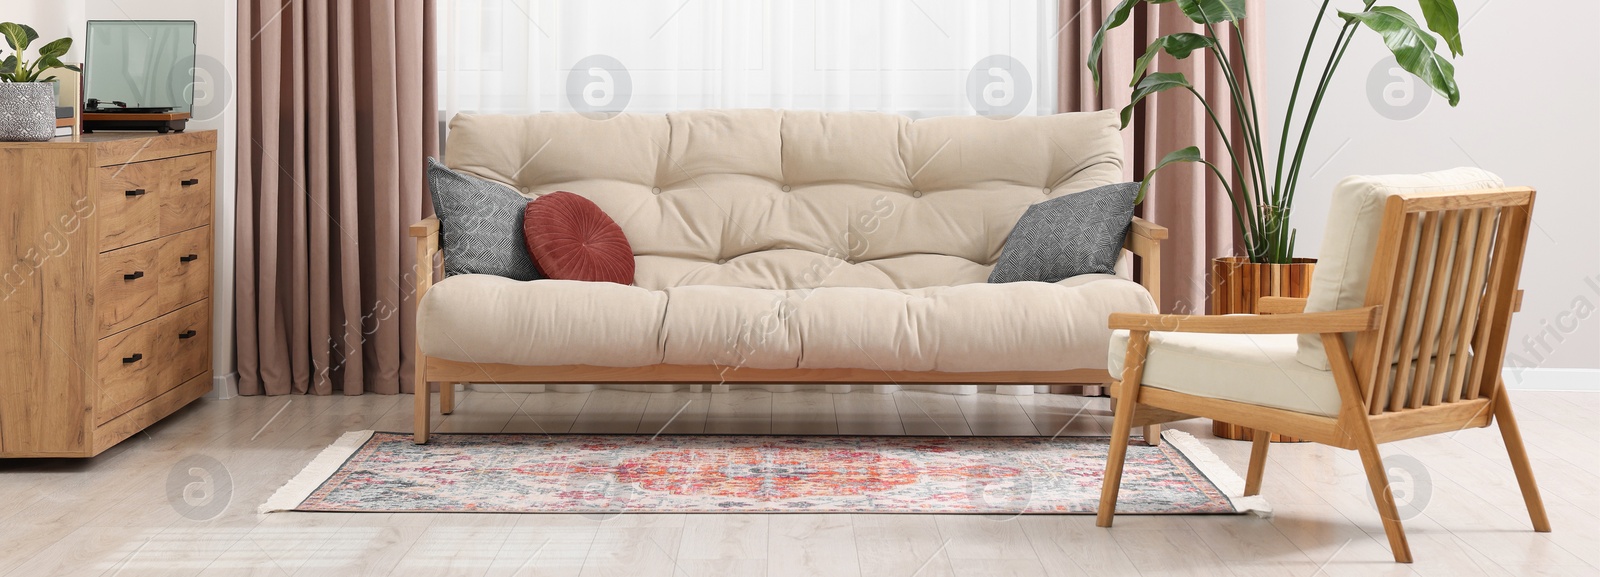 Image of Living room interior with beautiful carpet and furniture. Banner design